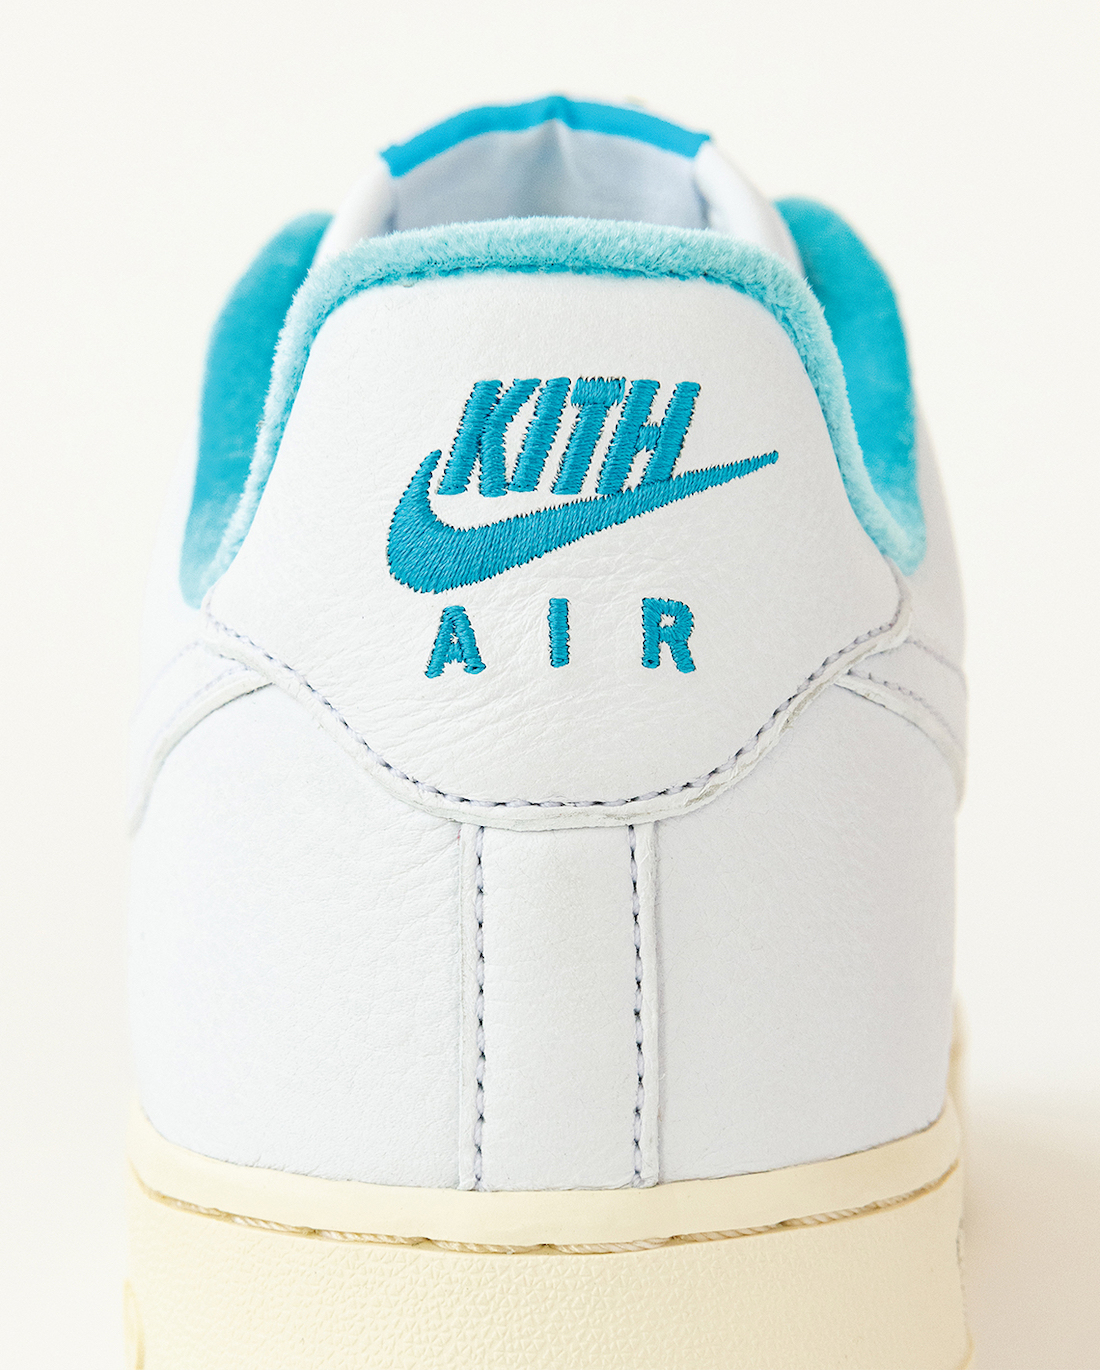 Kith Nike Air Force 1 Low Hawaii DC9555-100 Release Date Price